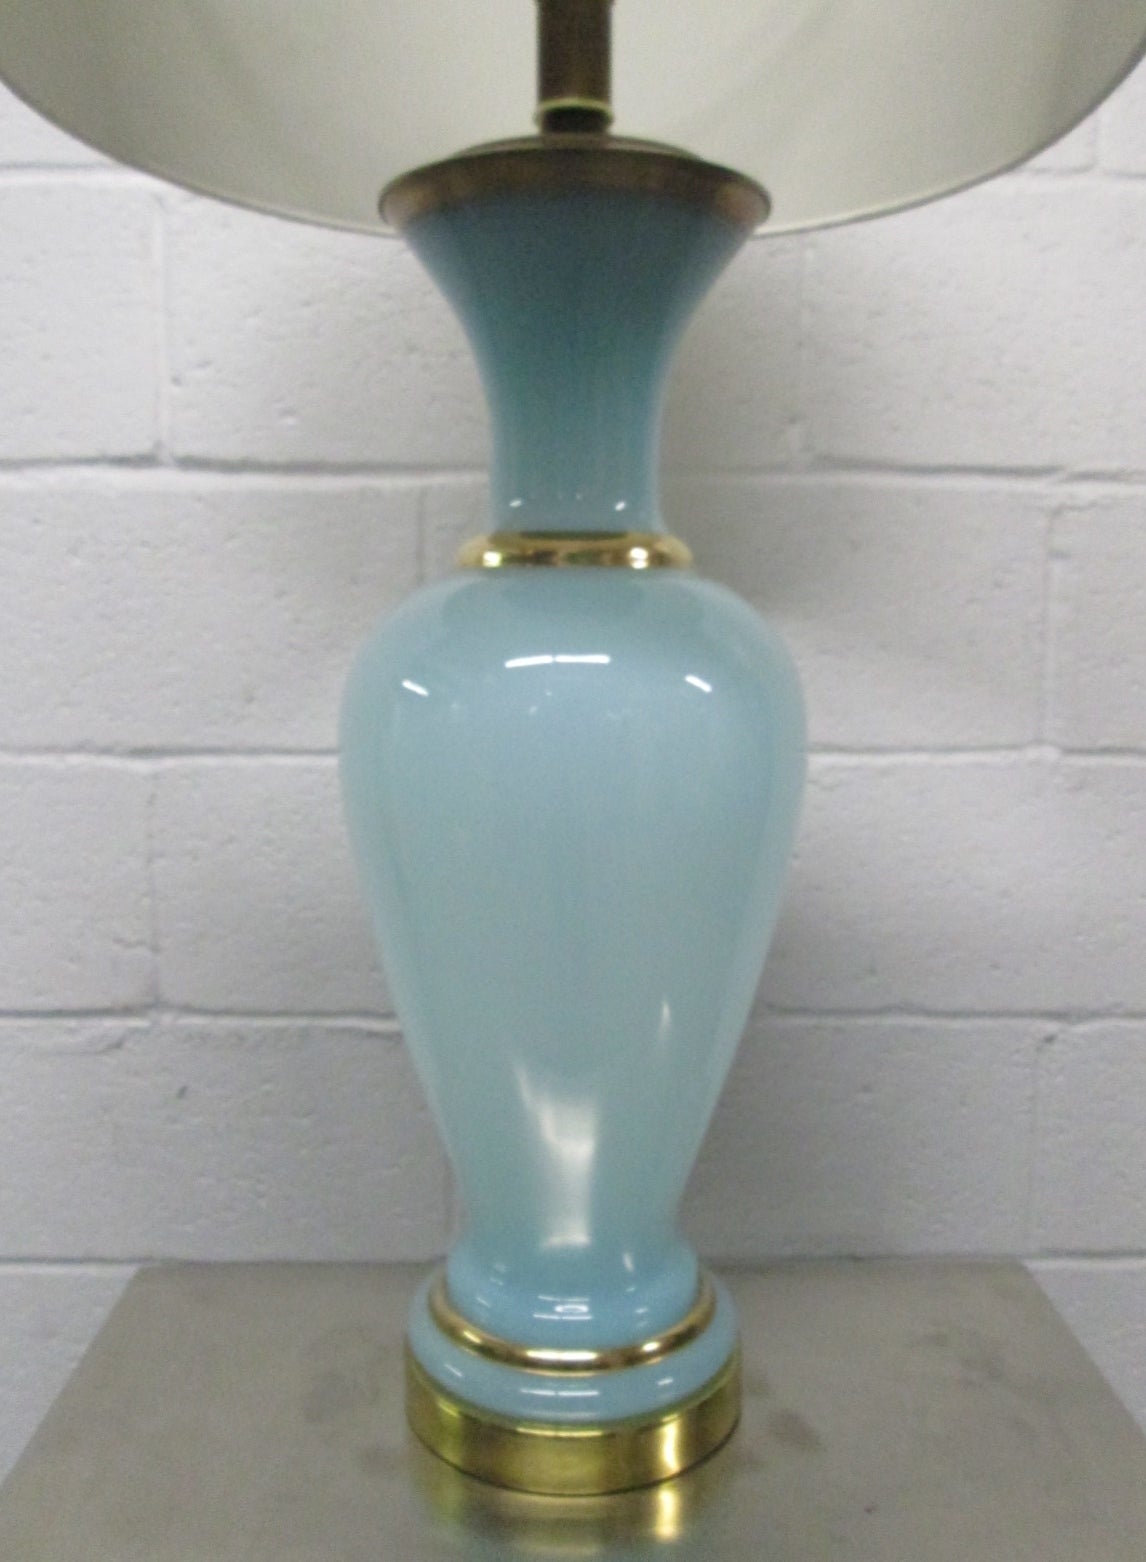 Pair of opaline lamps in teal with a brass base and brass top with gilded trim. Hollywood Regency.
Measures: 34.5H (to top of finial). 24.25H (to under bulb socket), and 7 in diameter at its widest. 
